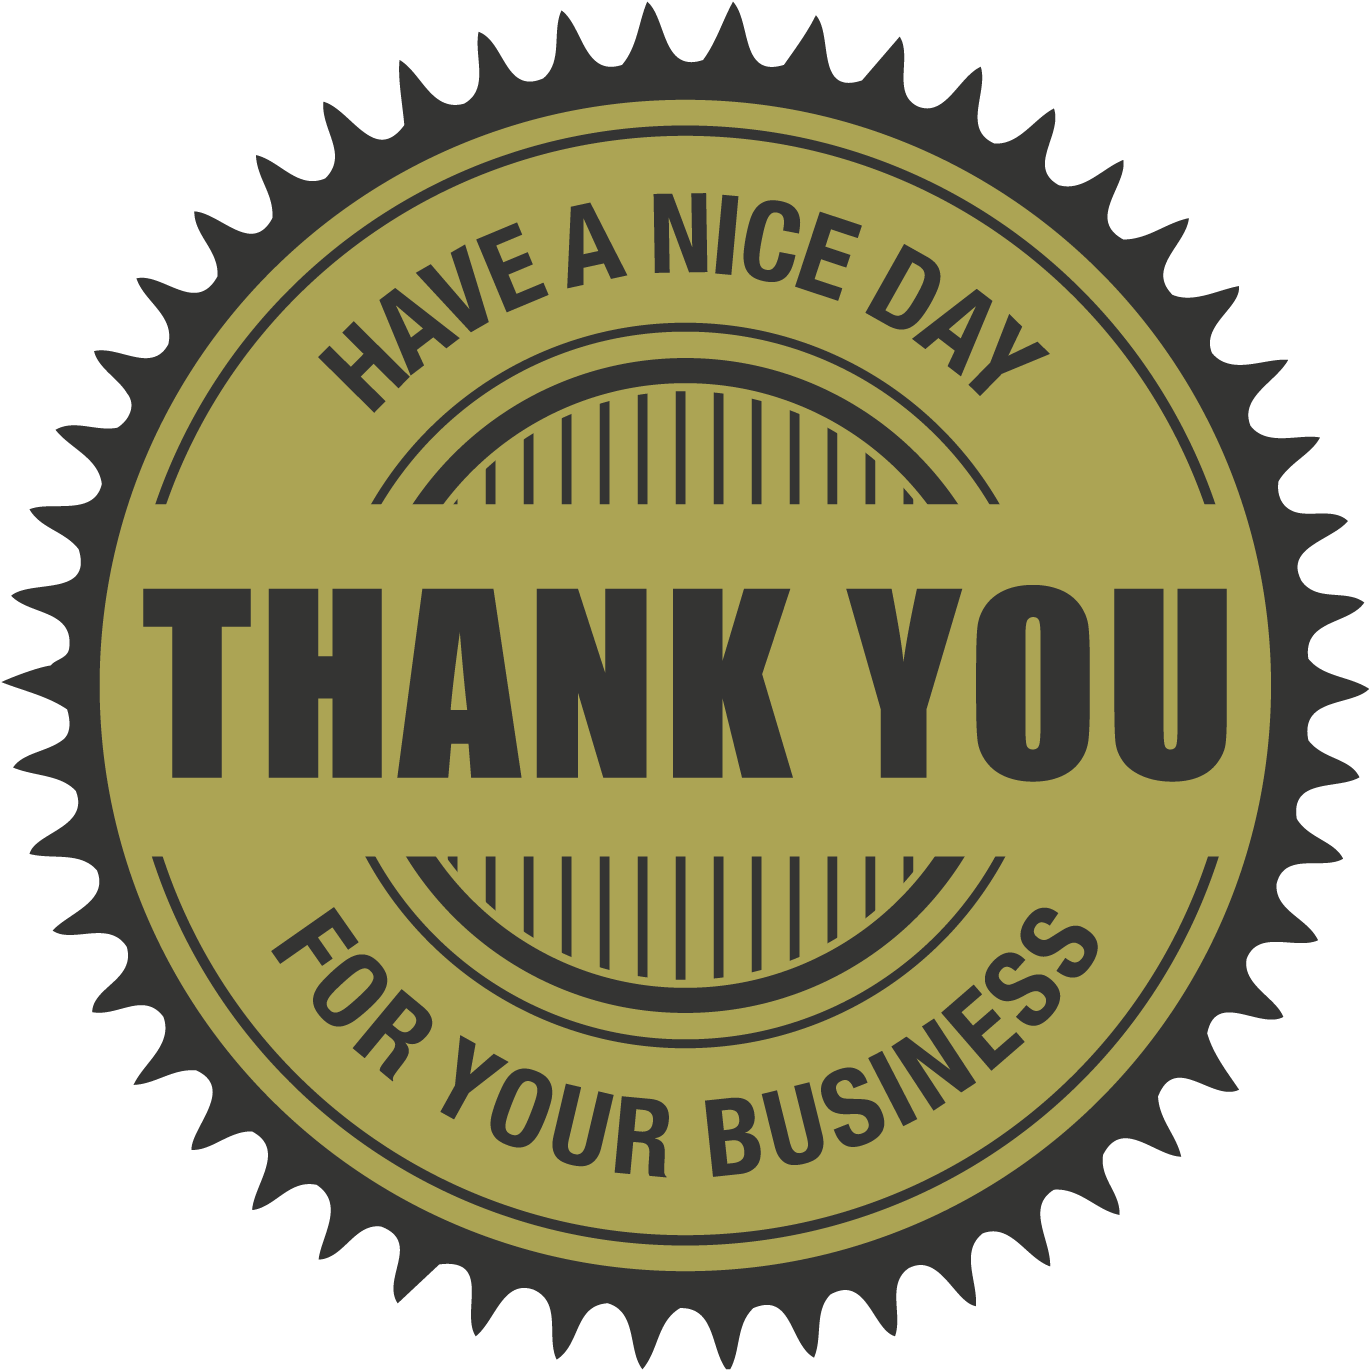 Thank You For Your Business - Thanks For Your Business (1667x1667)